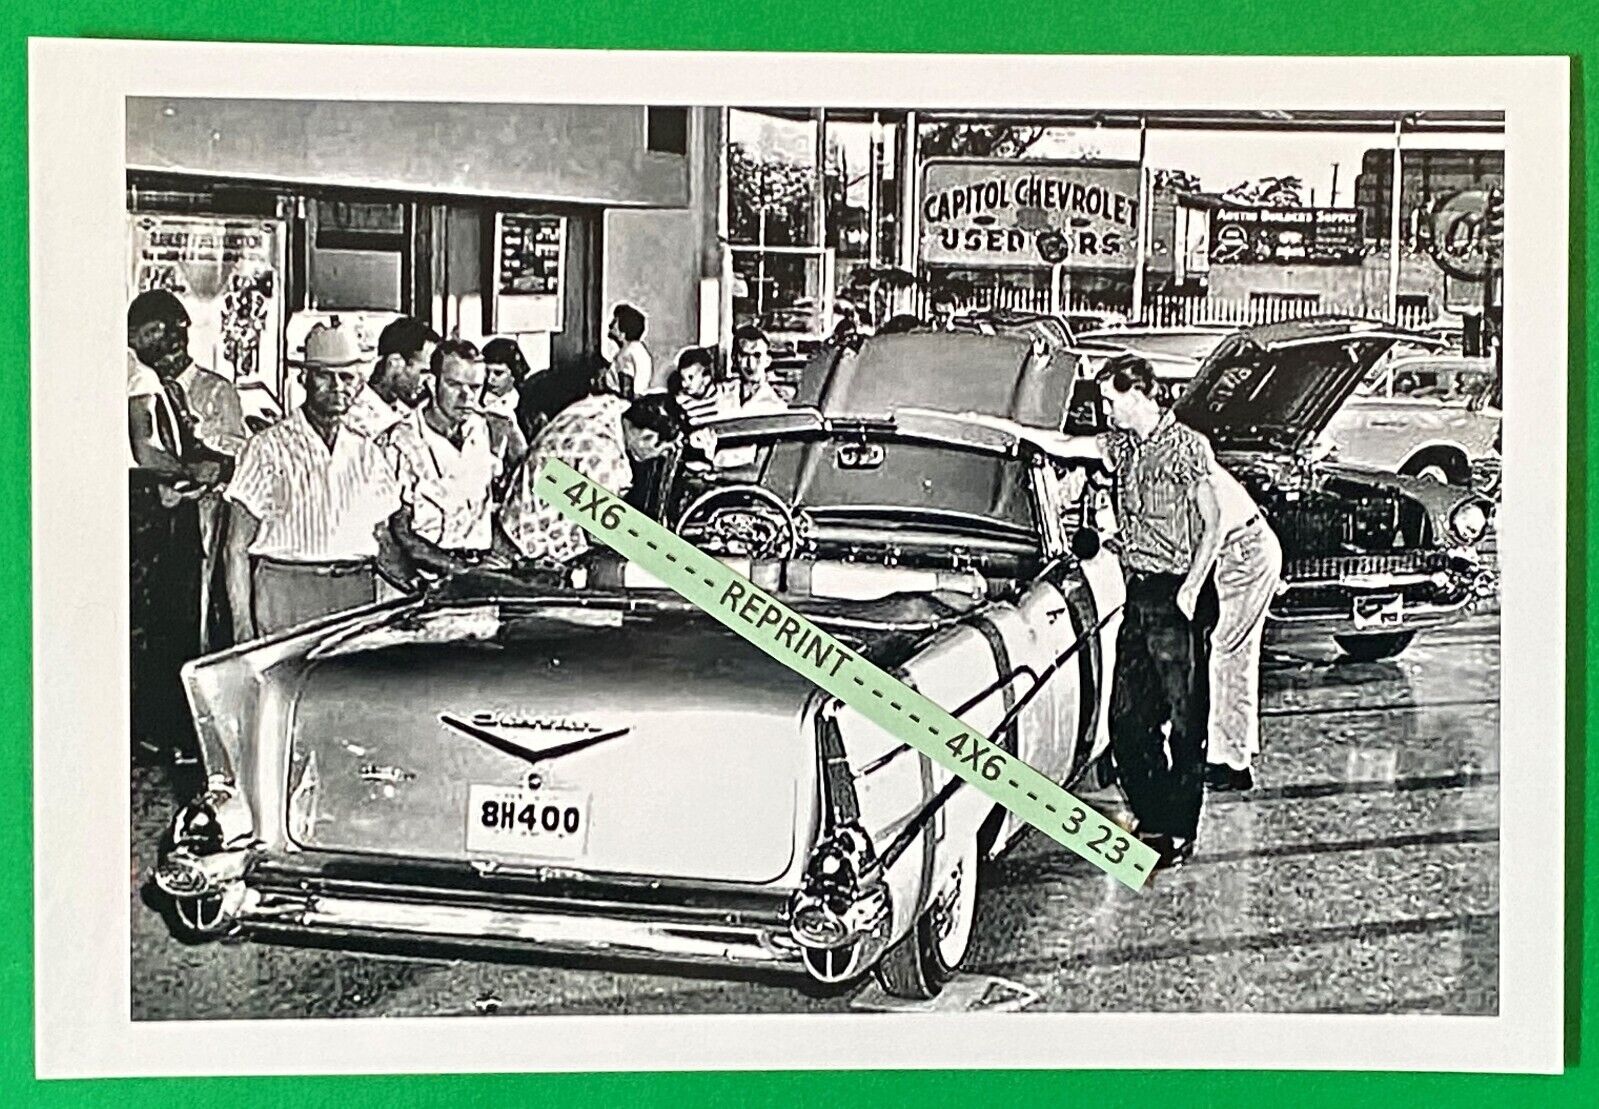 Found 4X6 PHOTO of Old 1957 CHEVY Auto Show Car Dealer ? Chevrolet